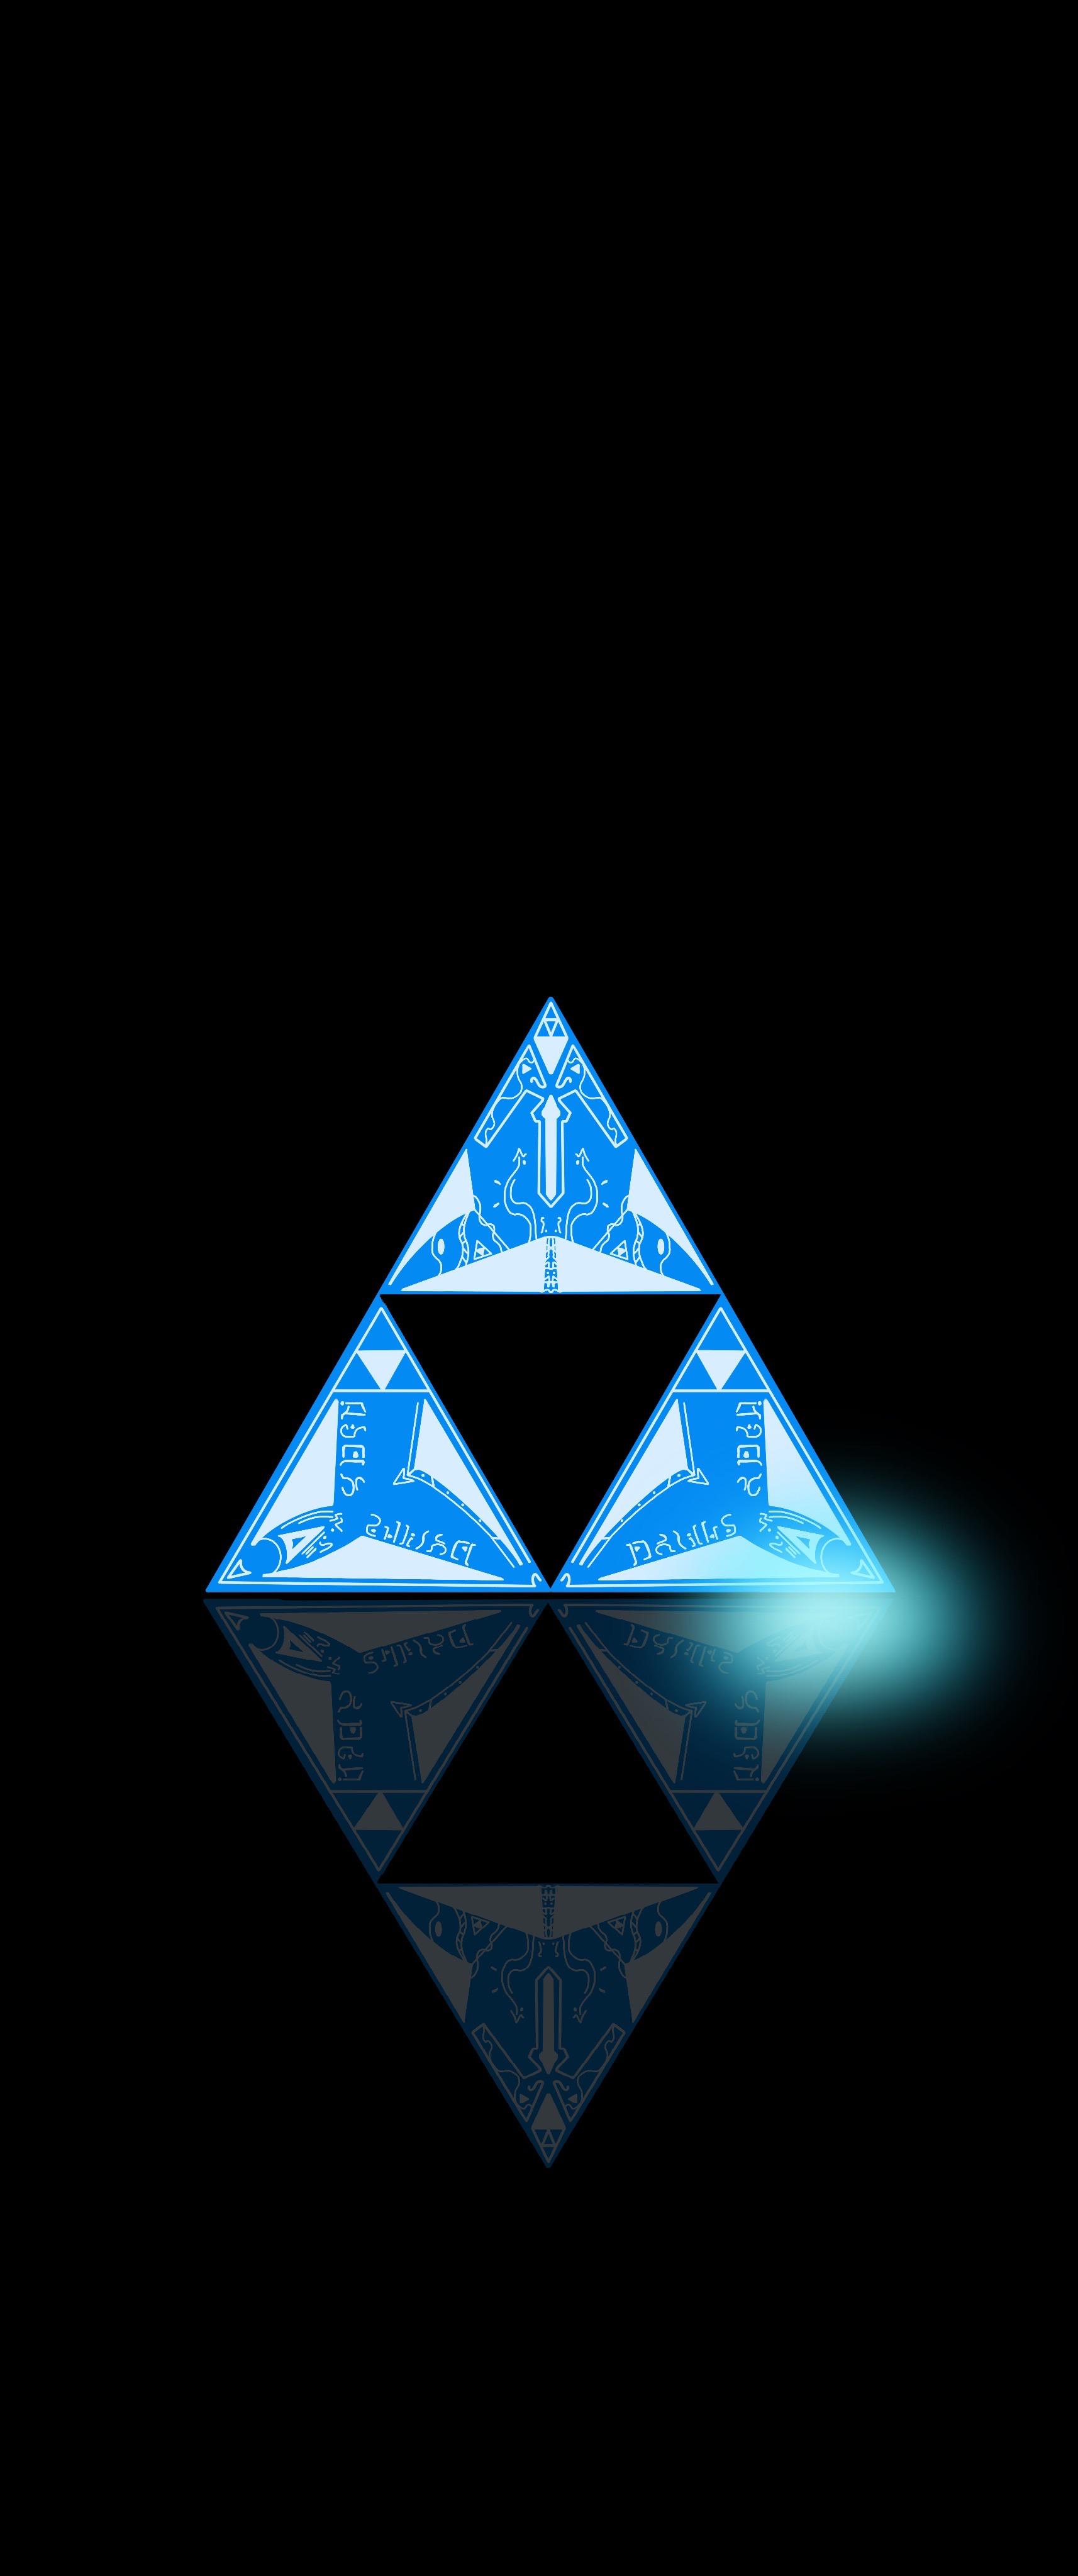 Here's a 4K phone wallpaper I made for all you Zelda fanatics out there (like myself), the Hylian script on it reads “Hero” and “Savior” [BotW]